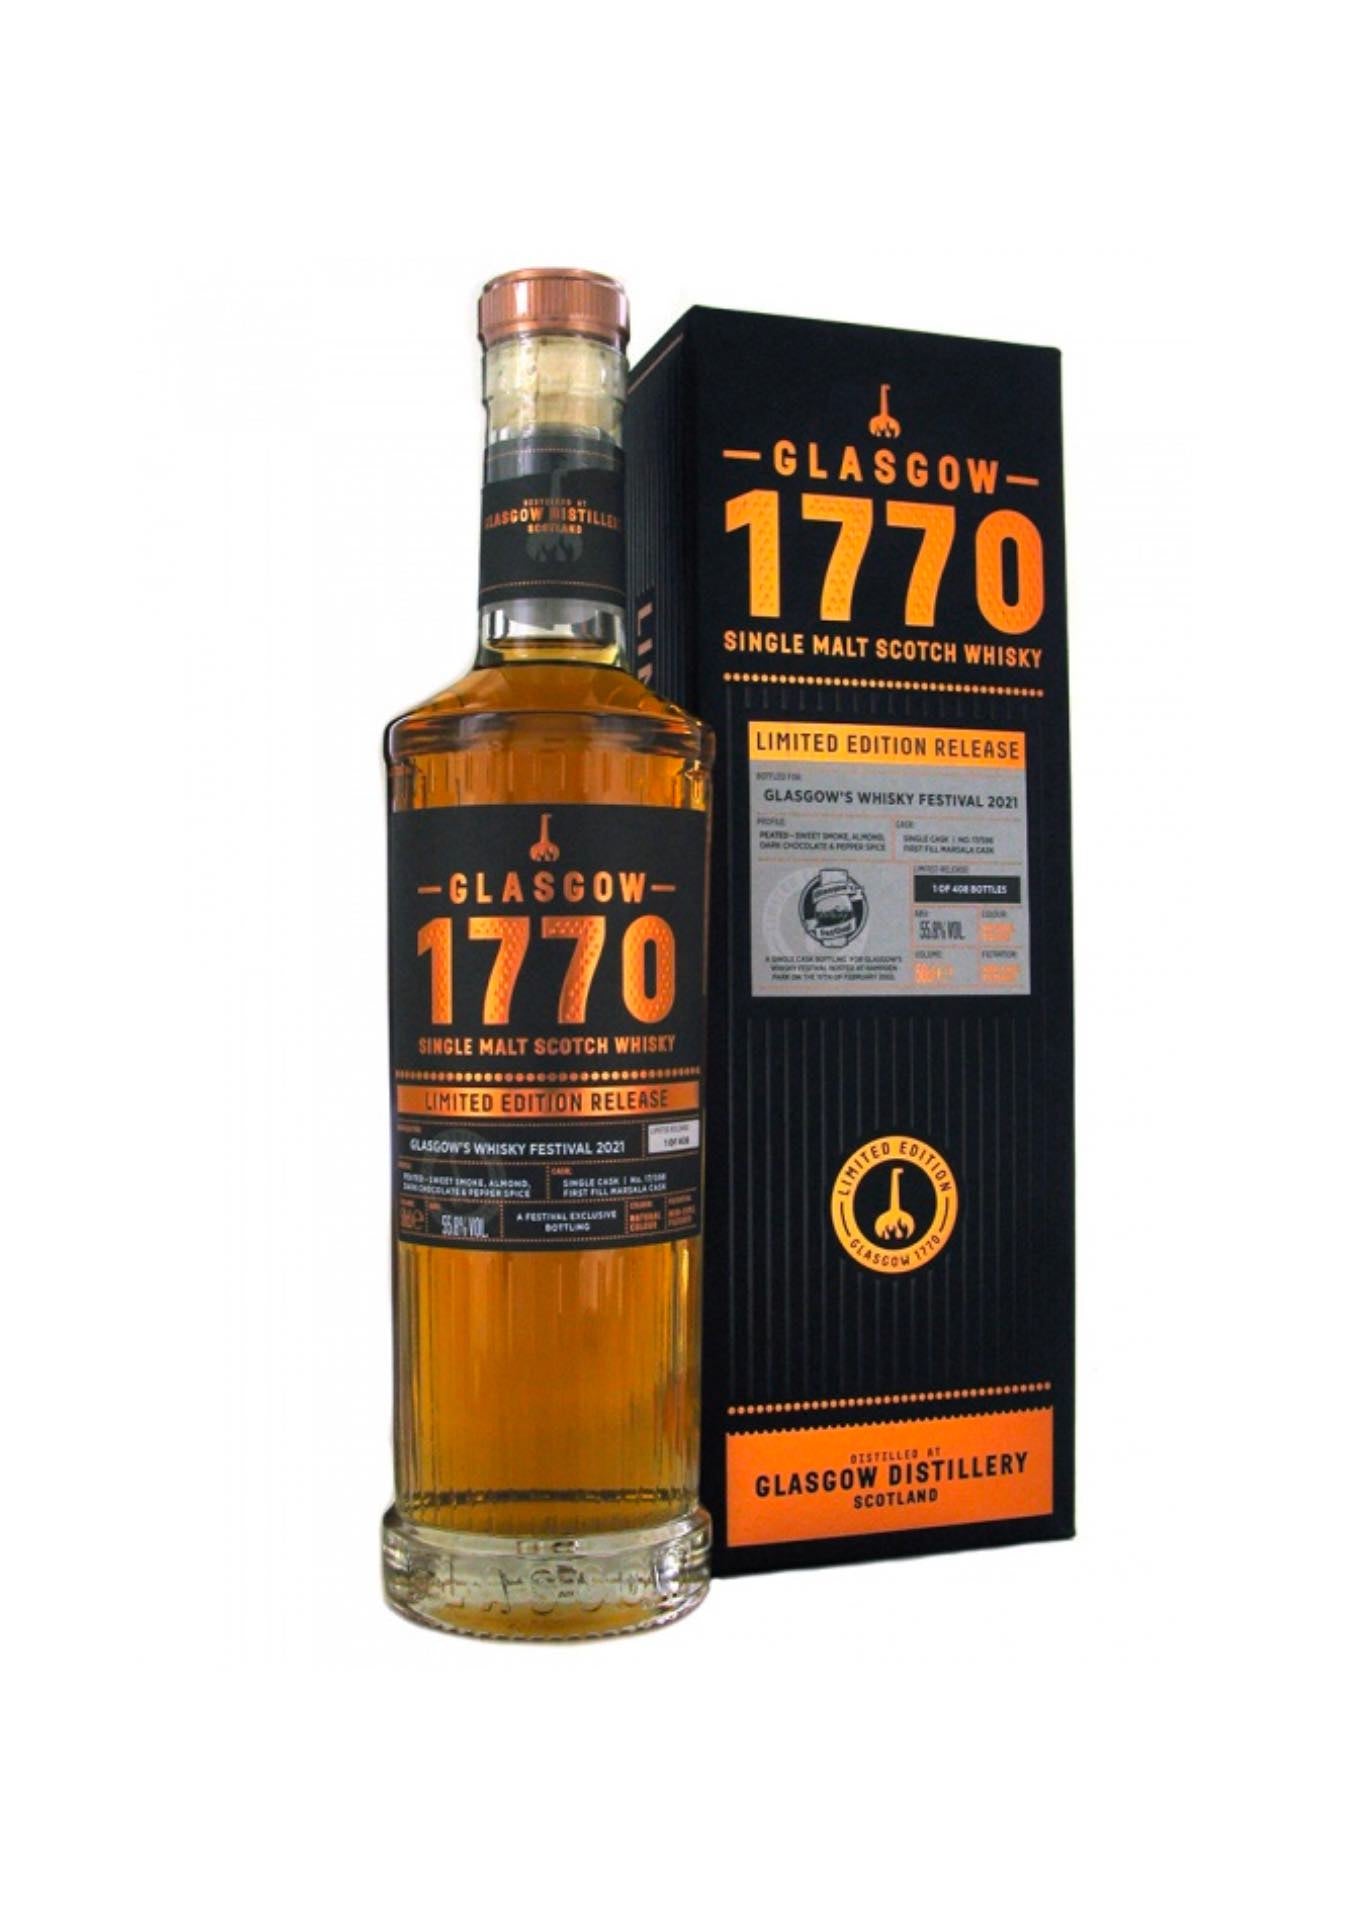 Glasgow 1770 Whisky Festival 2021, Charity Auction